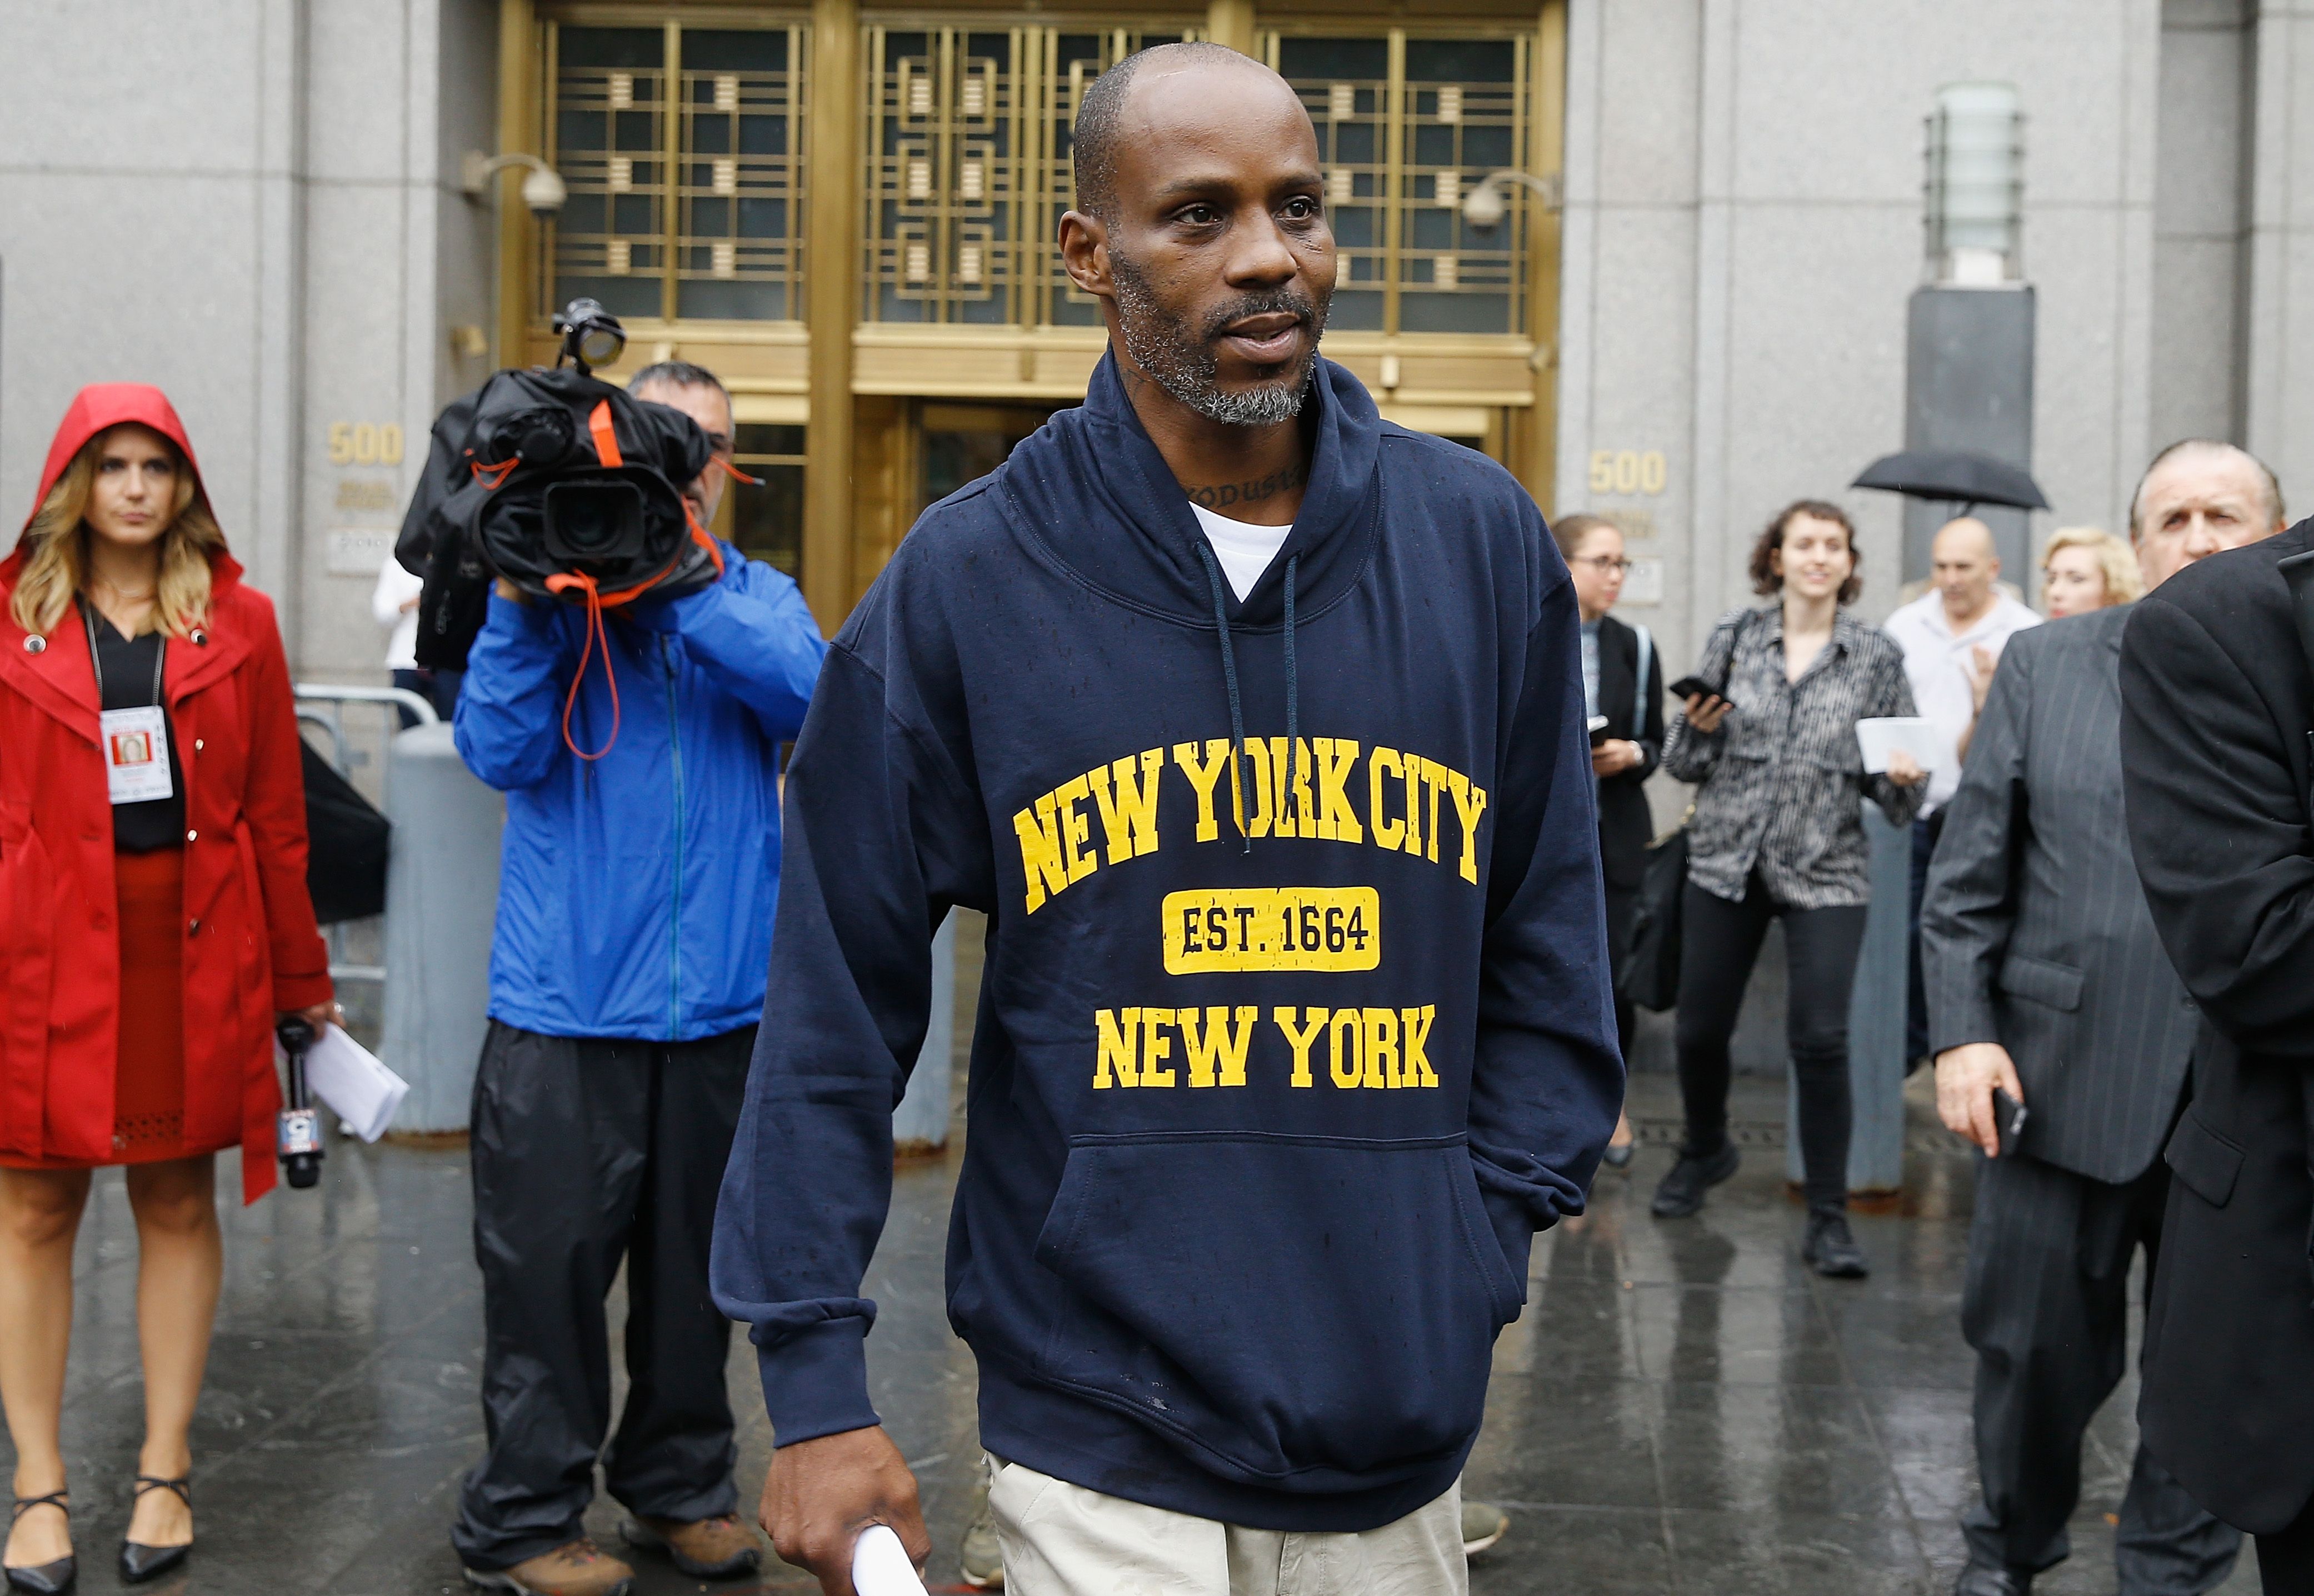 Rapper DMX leaving the courthouse after his tax evasion charges back in 2017, in New York City | Photo: John Lamparski/Getty Images